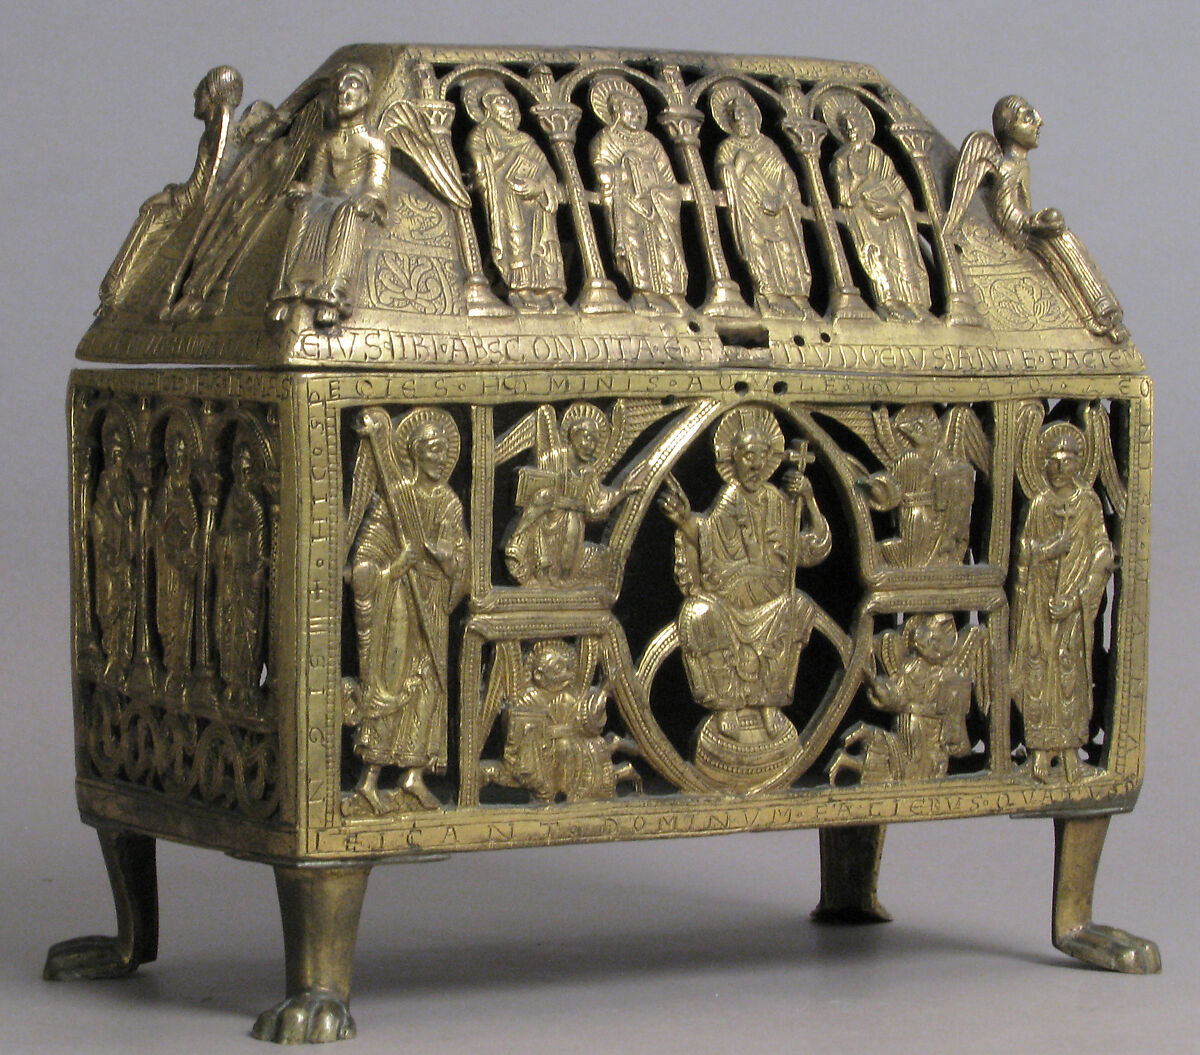 Chasse, Copper alloy-gilt, German 